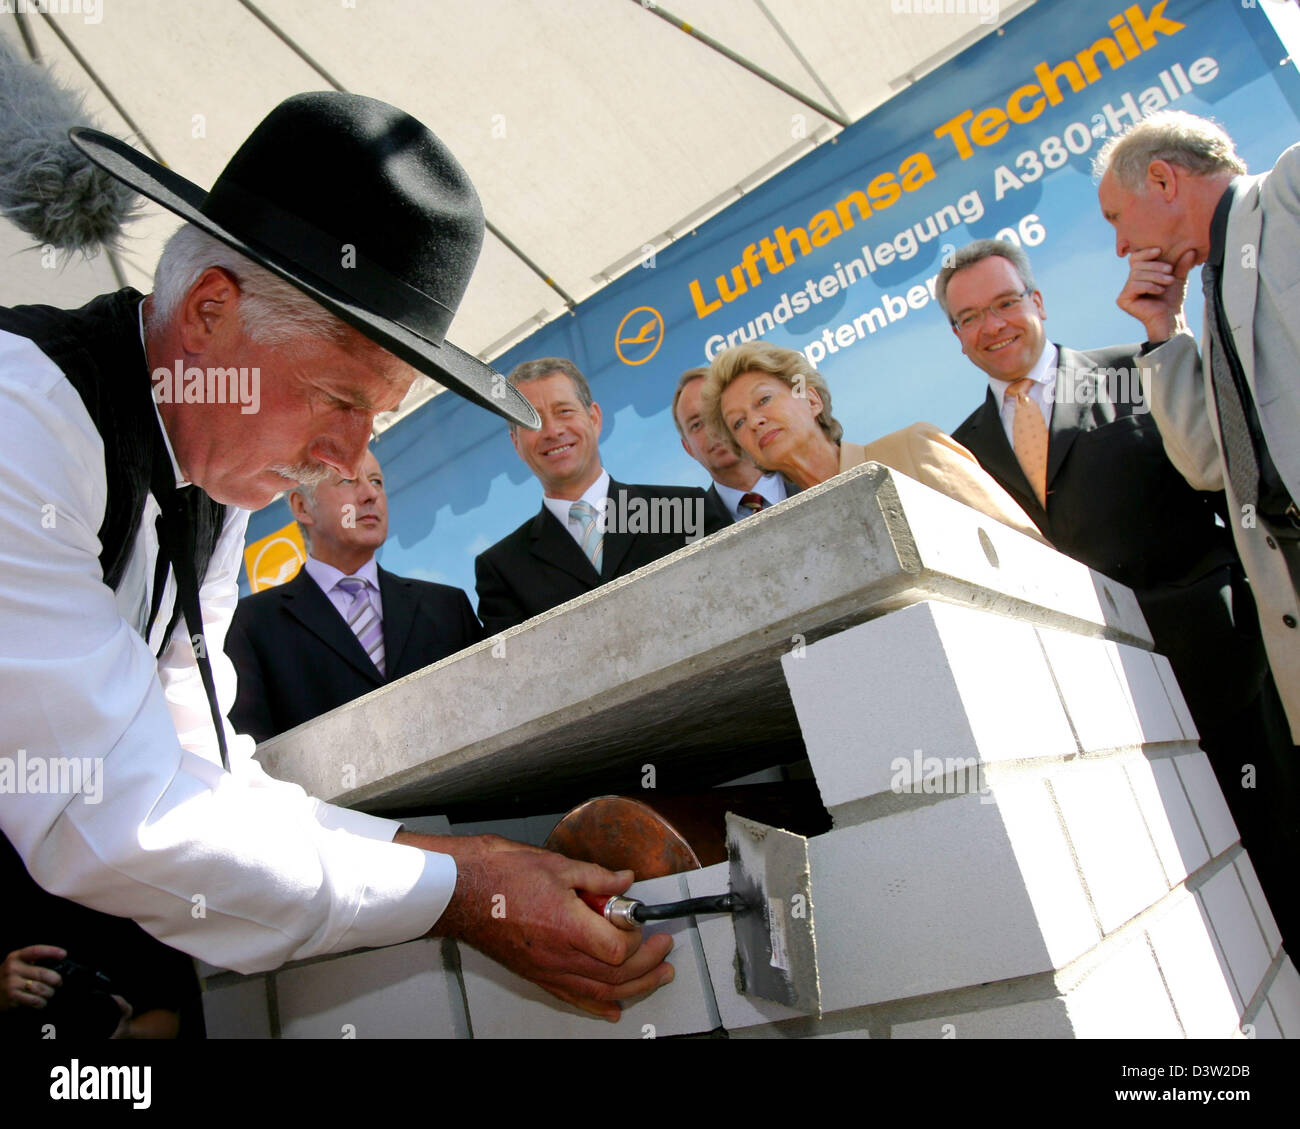 Foreman Wolfgang Breitenbach (L) lays the forner stone in the presence of (L-R) Fraport board member Manfred Schoelch, Hessian Minister of Economy Alois Rhiel, CEO of Lufthansa Technik August Wilhelm Henningsen, Lord Mayor of Frankfurt Petra Roth, Lufthansa board member Stefan Lauer and architect Volkwin Marg for the new Lufthansa maintenance hall at the Rhein Main International ai Stock Photo